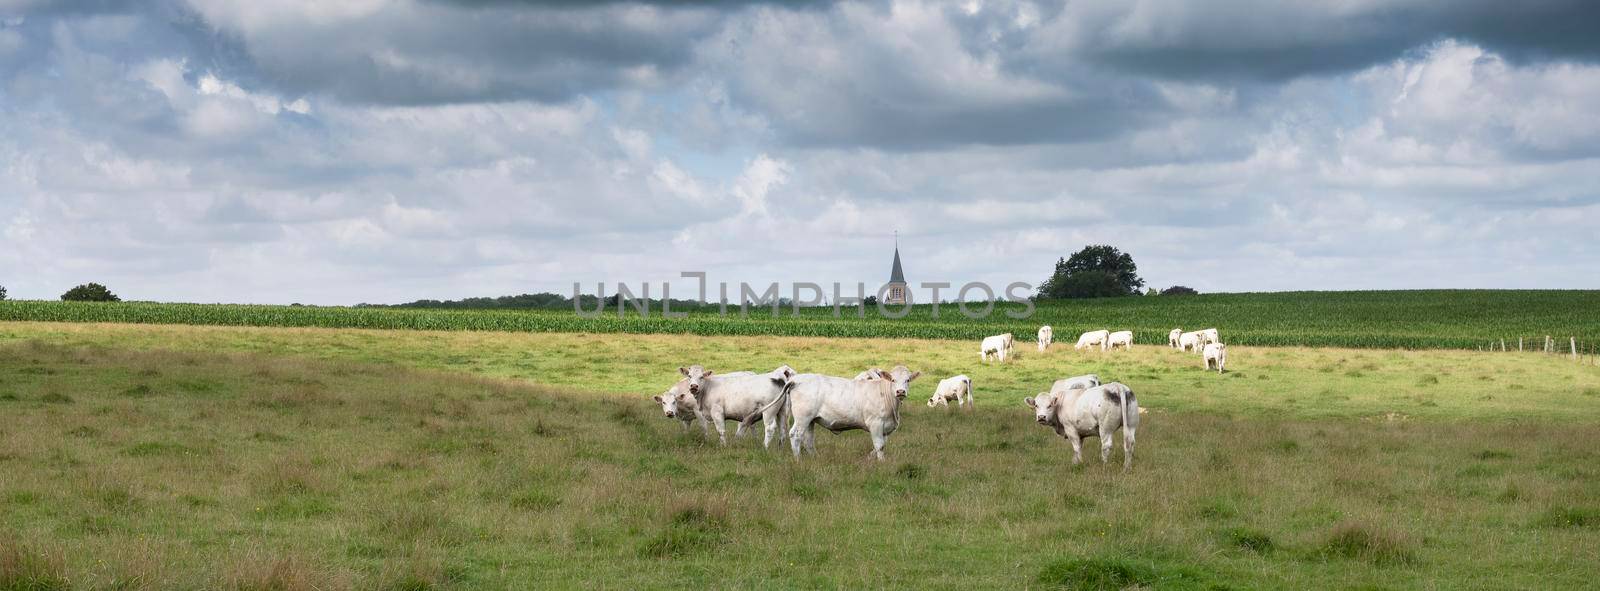 panorama picture of sky with clouds and white cows in green grassy countryside landscape of northern france near charleville